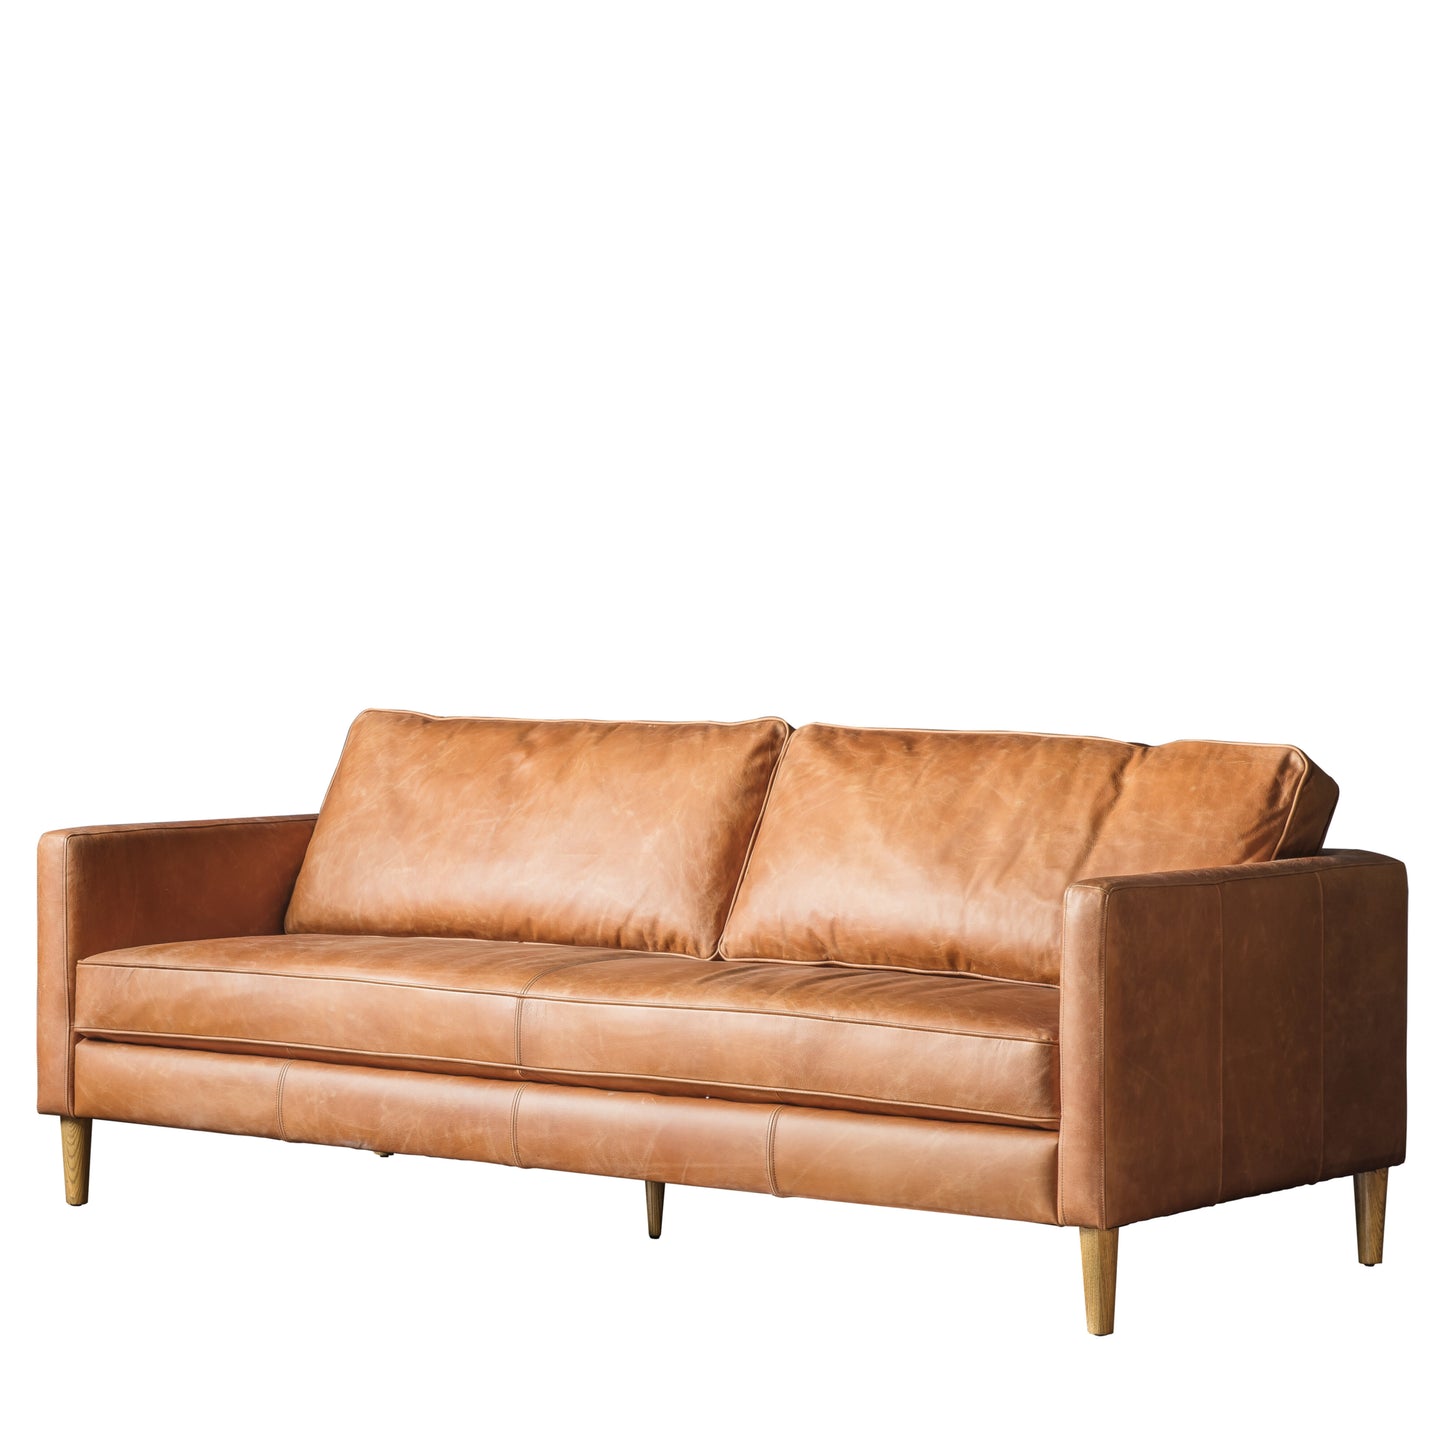 Ozzy 2 Seater Sofa | Vintage Brown Leather